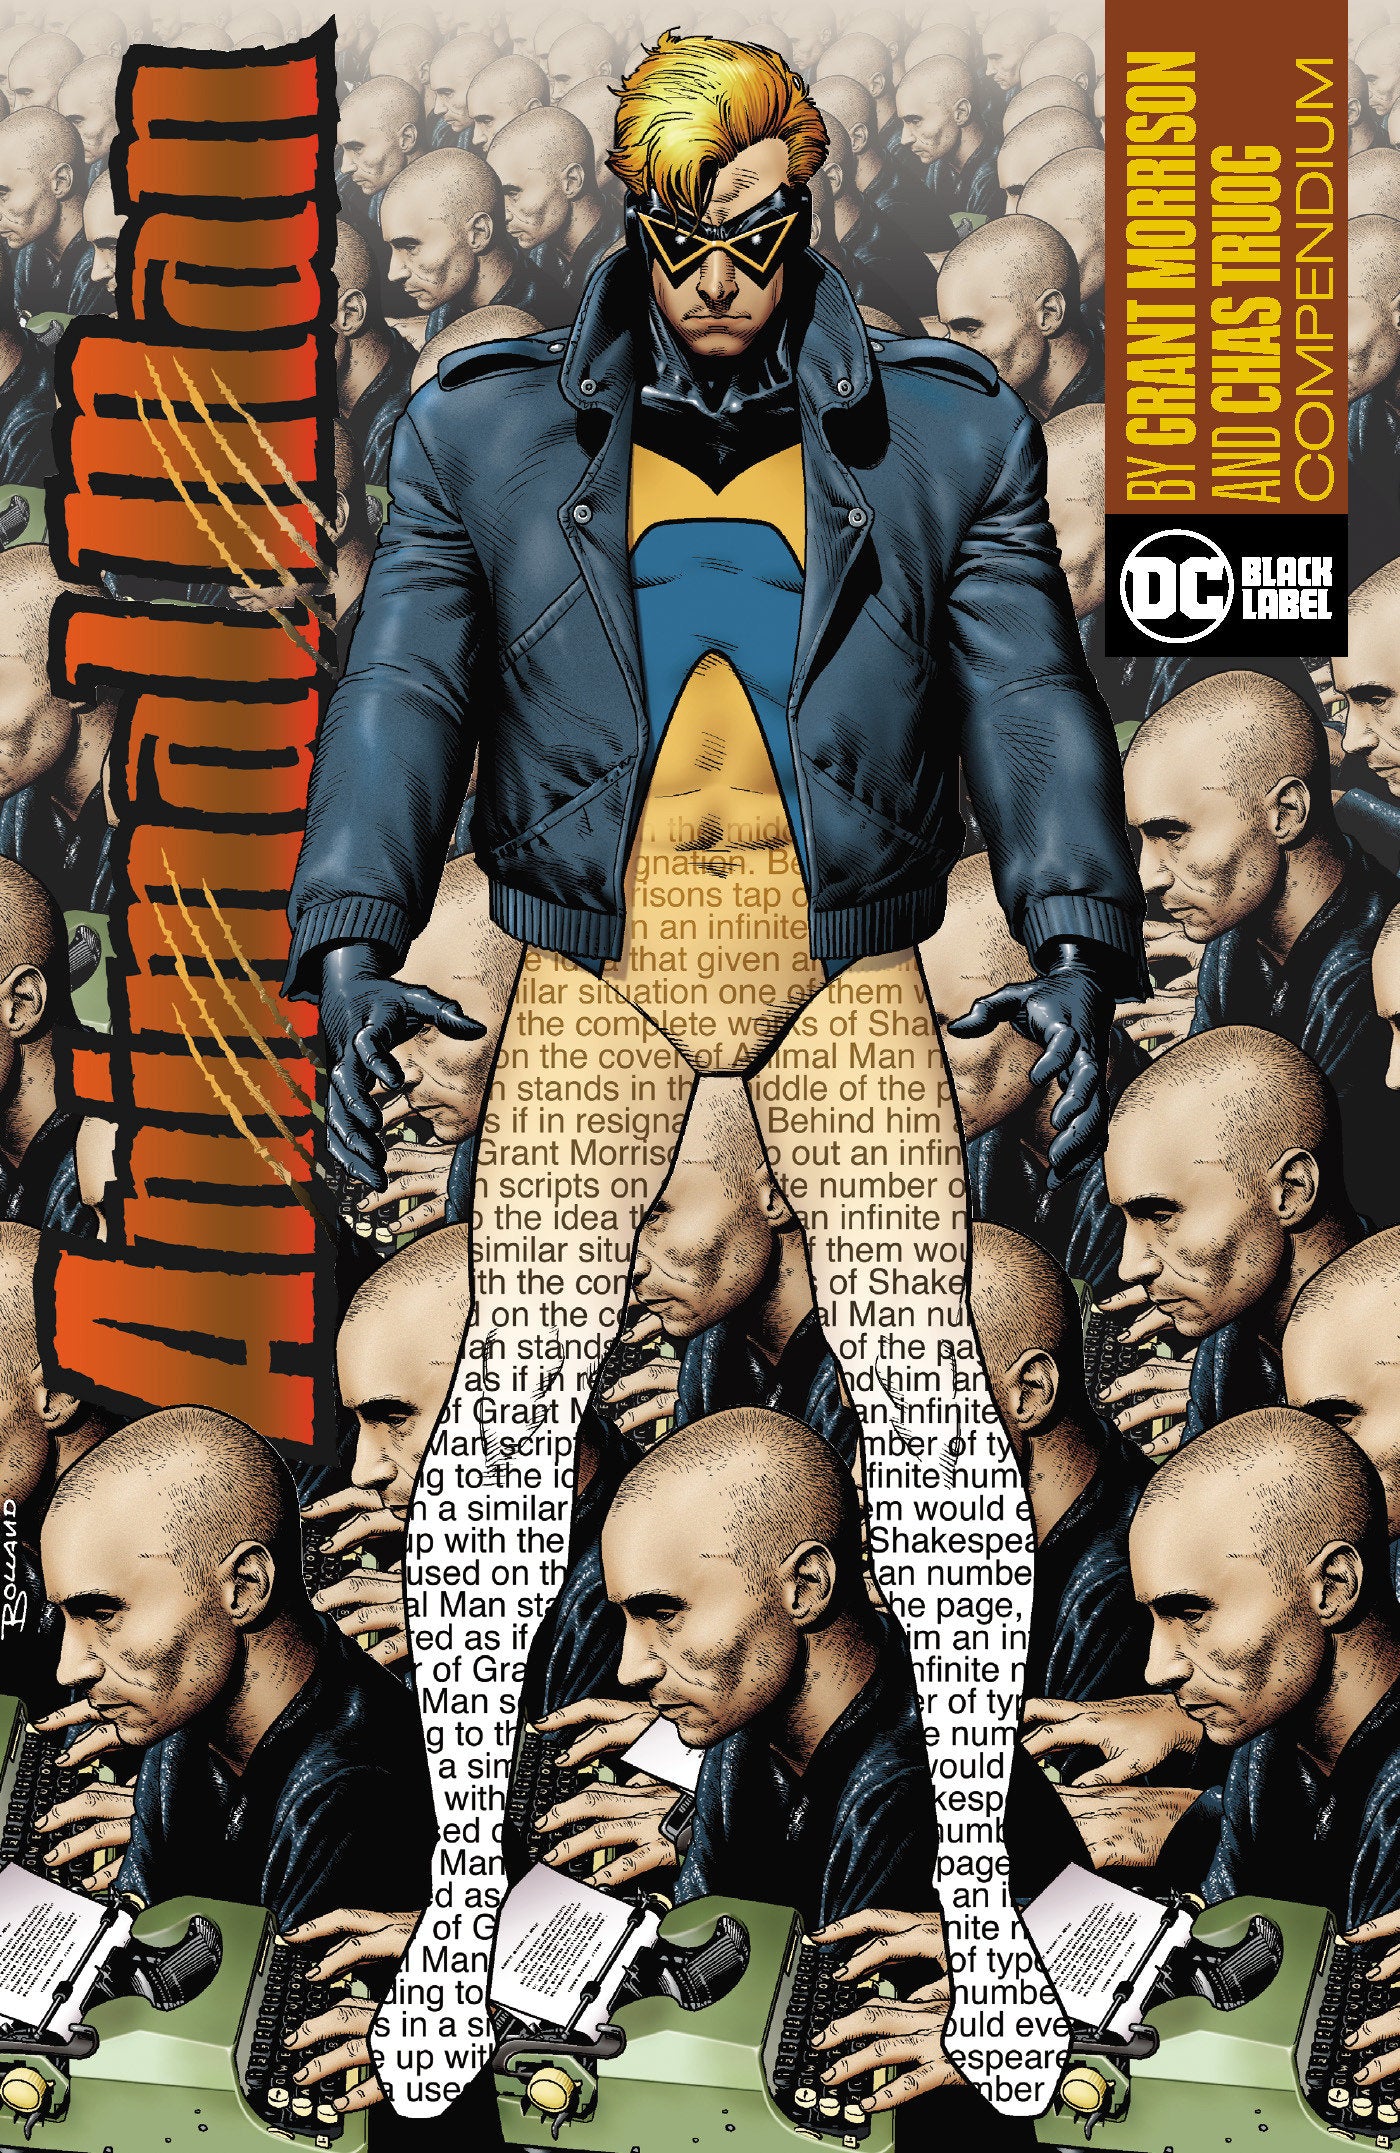 Animal Man By Grant Morrison And Chaz Truog Compendium | BD Cosmos